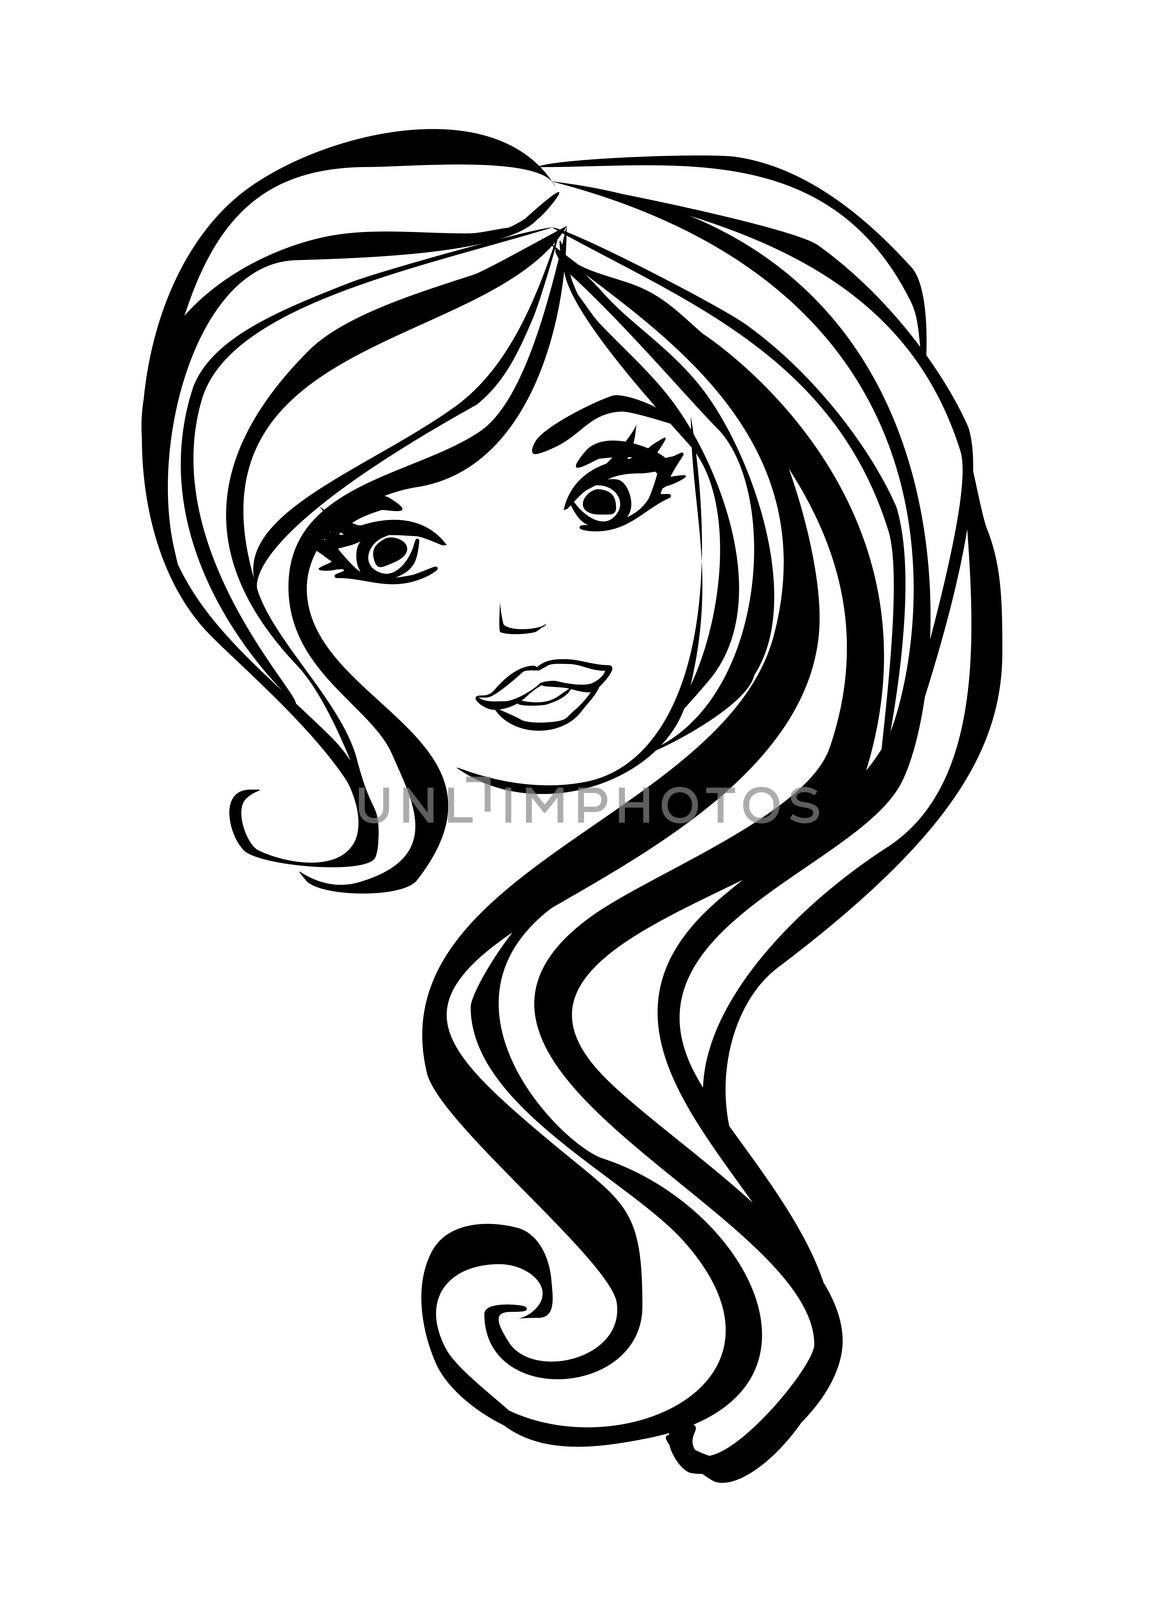 Abstract Beautiful Woman doodle Portrait by JackyBrown